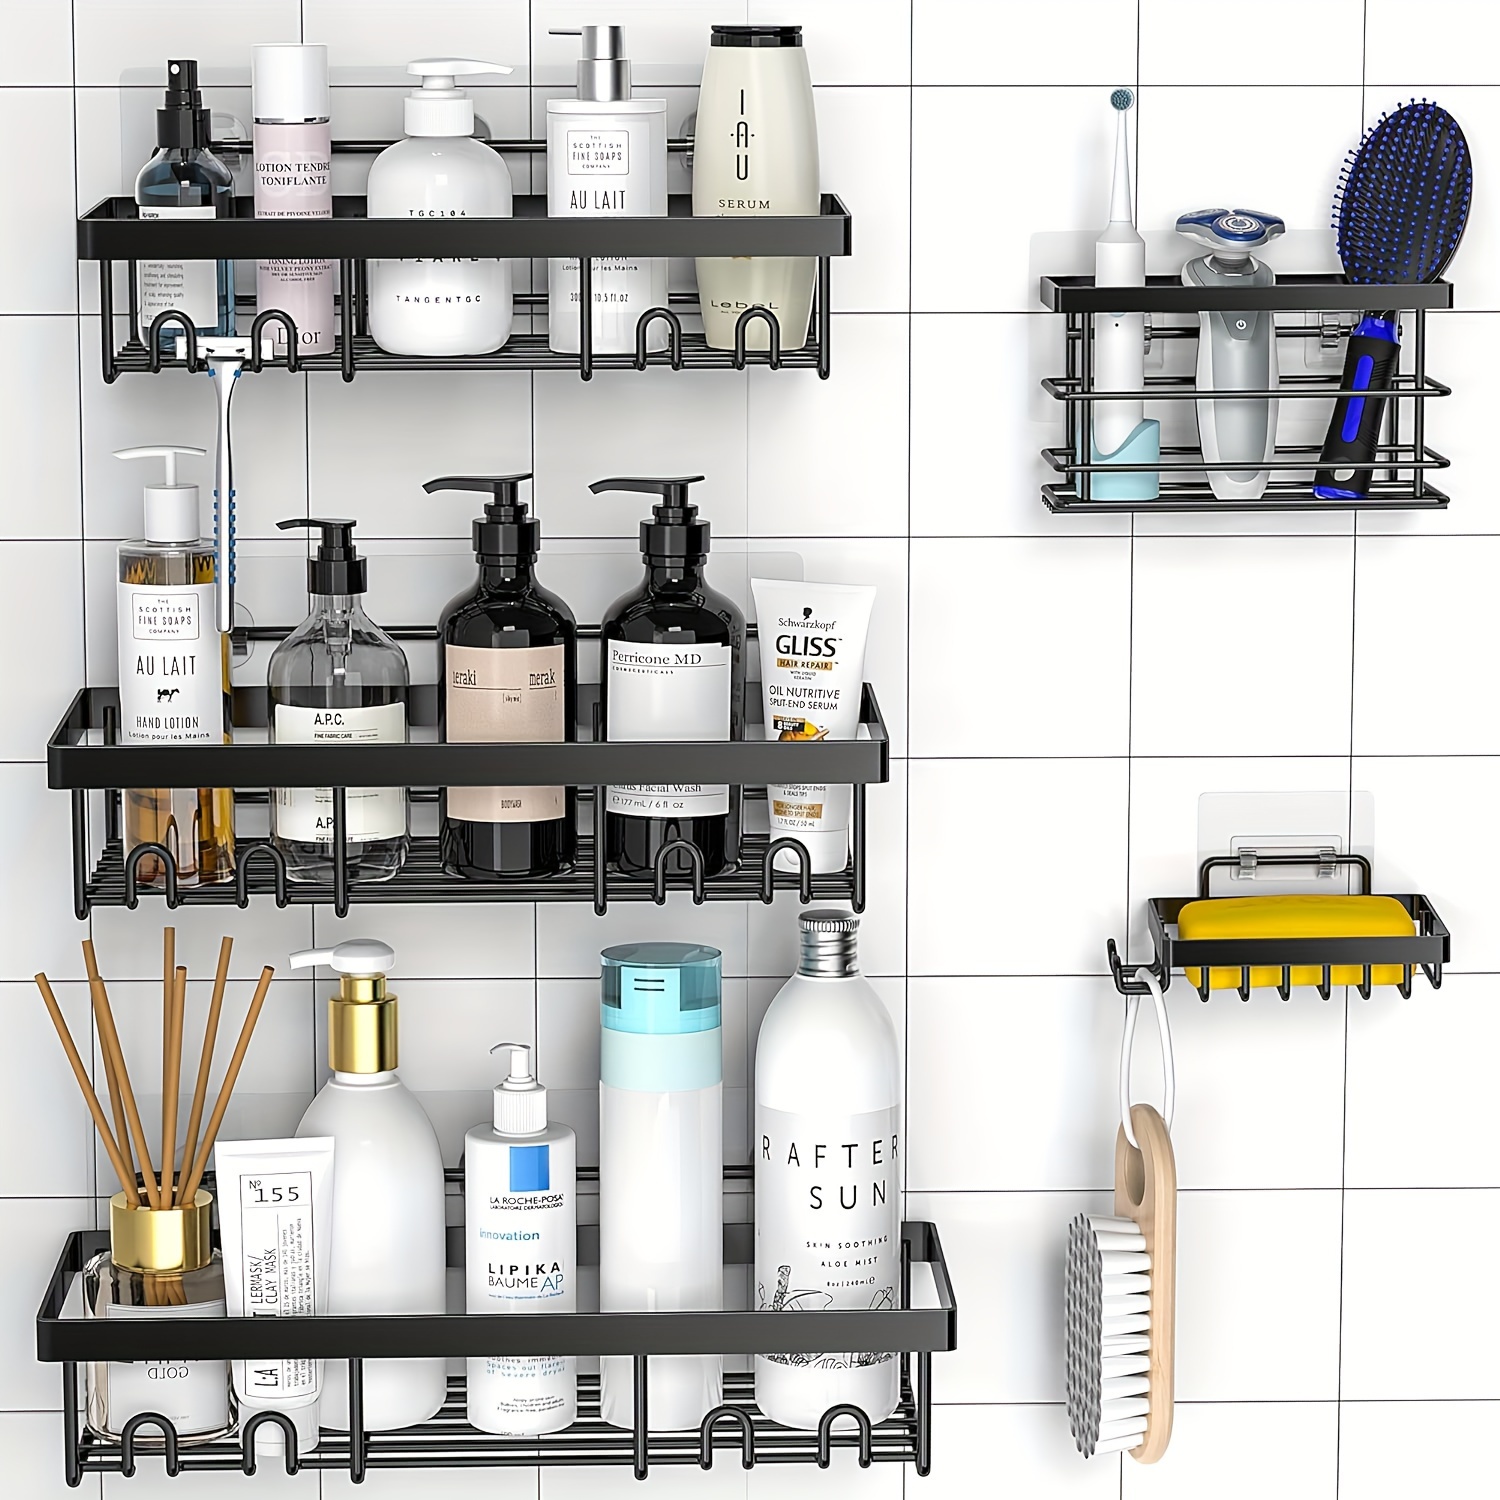 

5 Pack Adhesive Shower Organizer Shelves Caddy Rack For Bathroom Storage Organization, Decor Inside Rv Accessories, Hanging First Apartment Household Camper Essentials